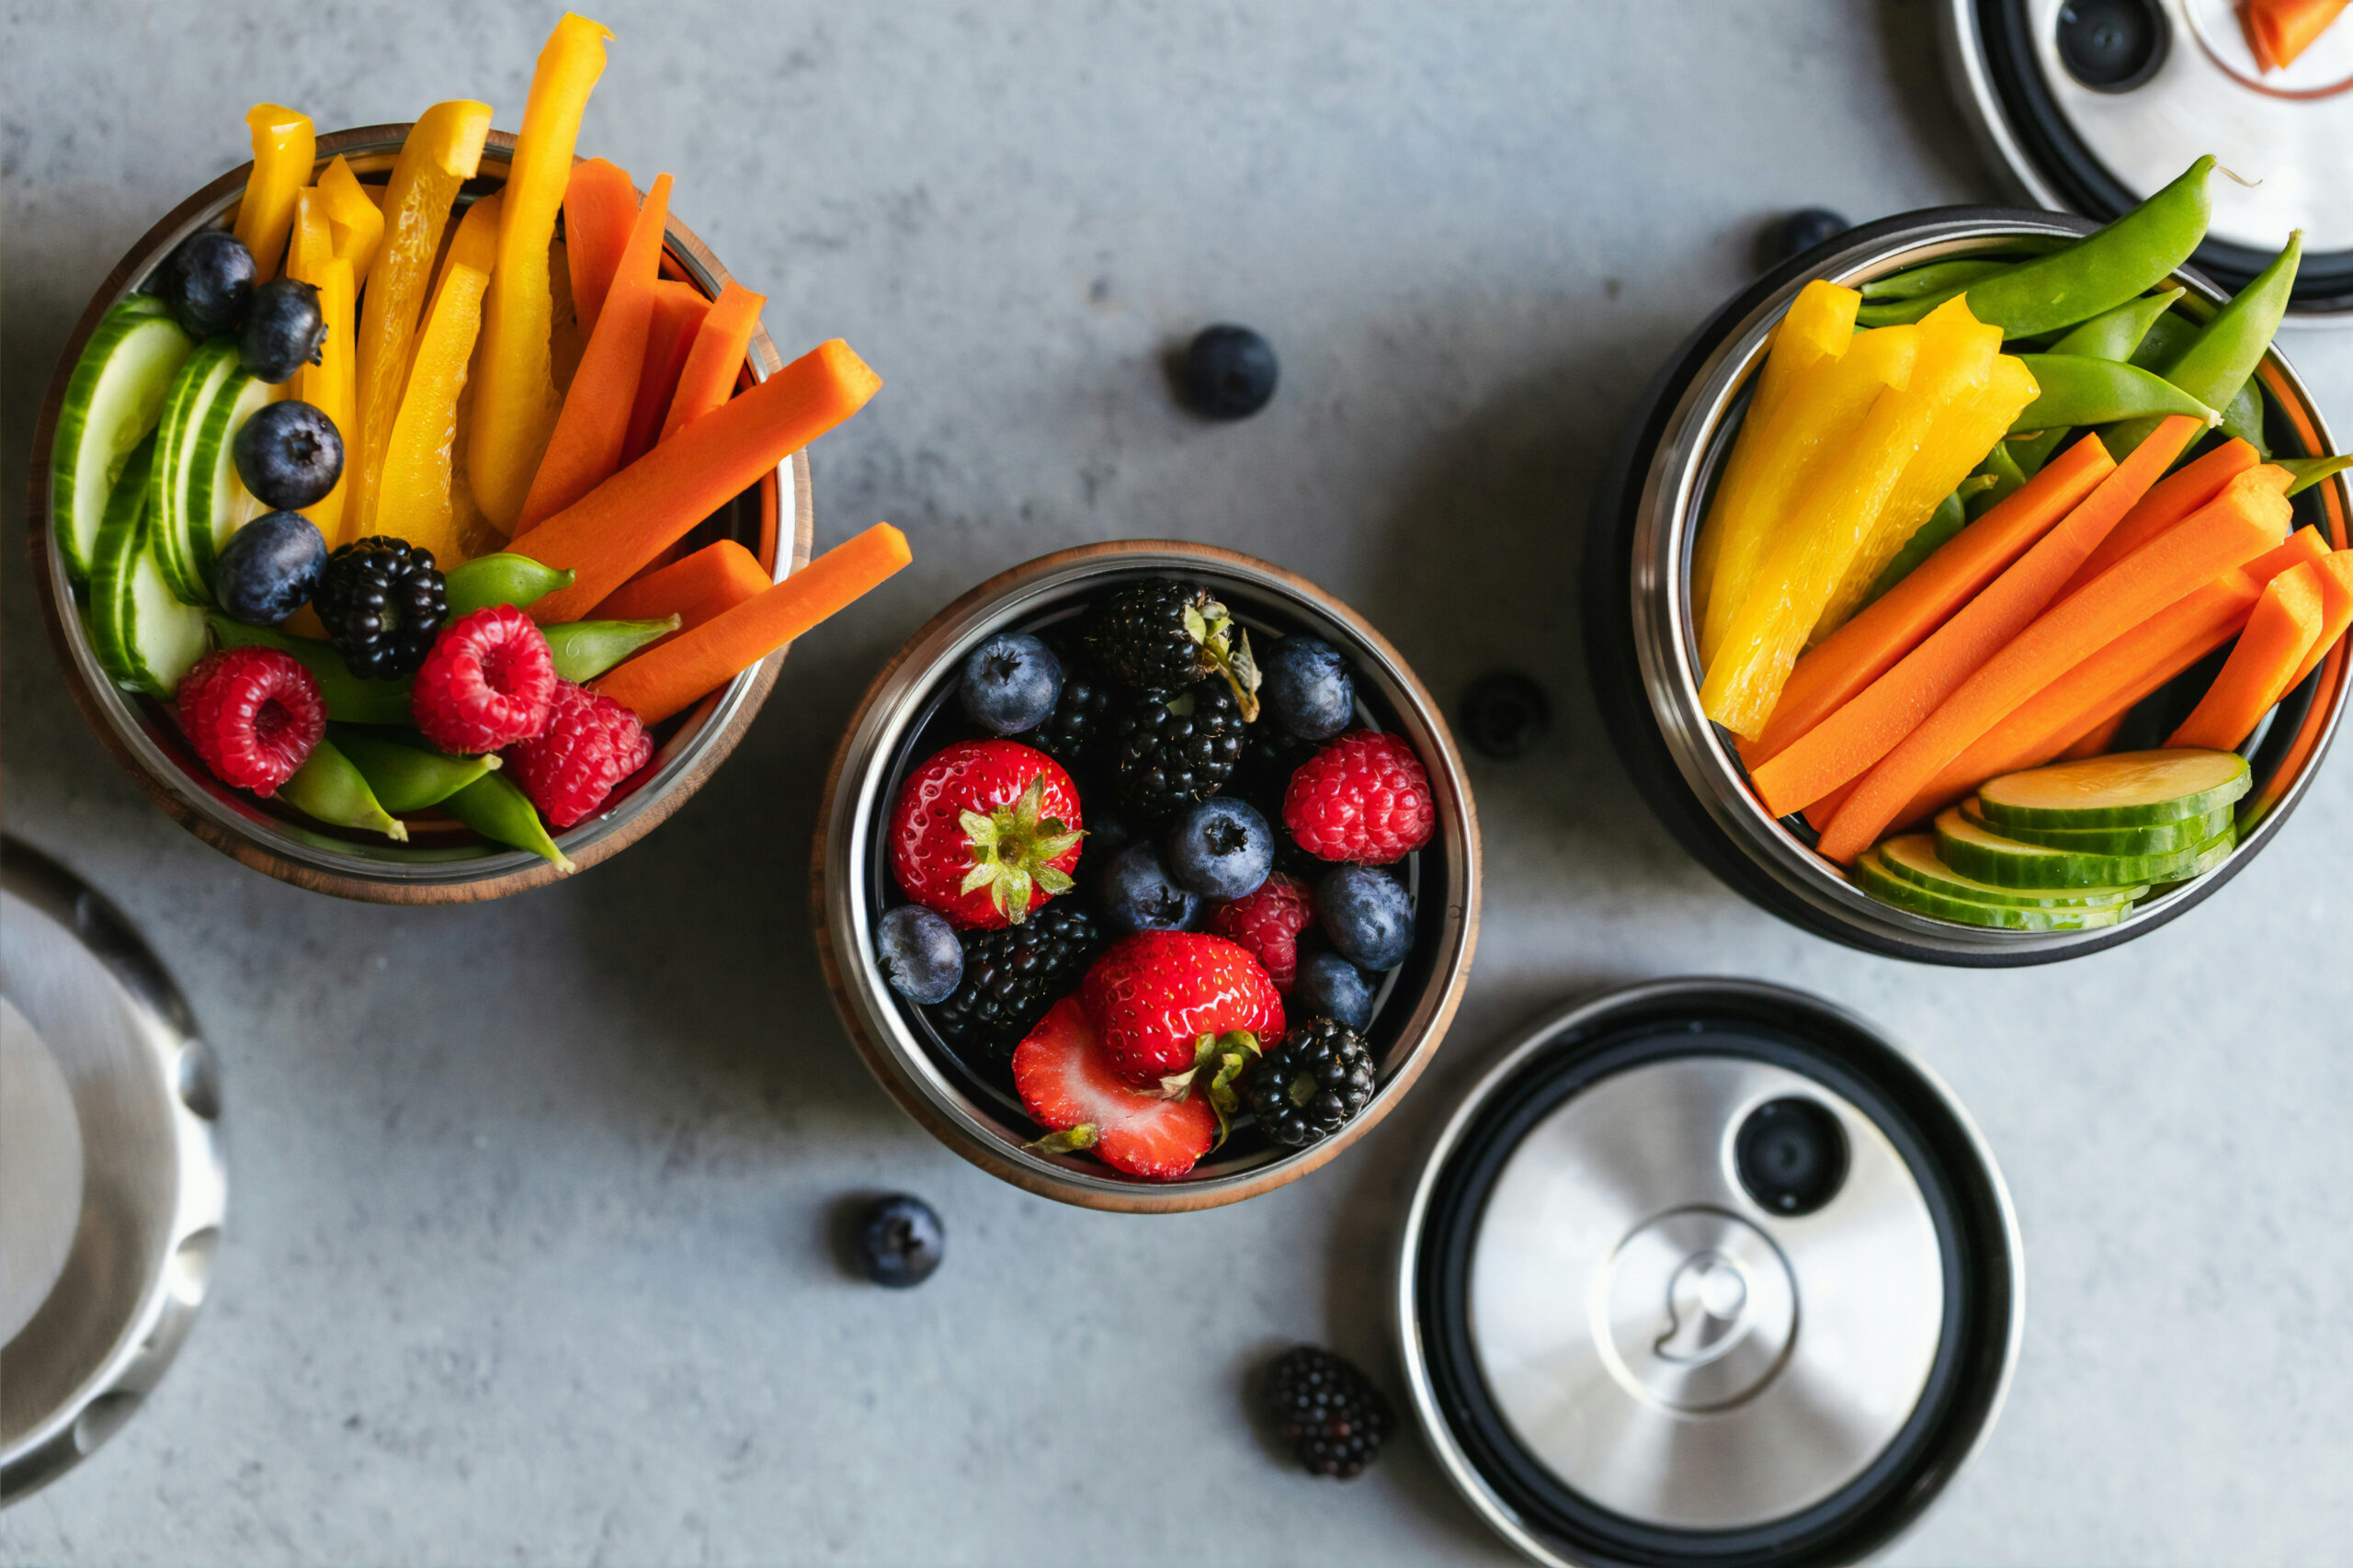 Two cups of sliced orange carrot sticks, yellow bell pepper slices, thinly sliced cucumbers circles and sugar snap peas. One cup of fresh blueberries, blackberries and raspberries. These fresh fruits and vegetables can be part of a healthy and well balanced snack.